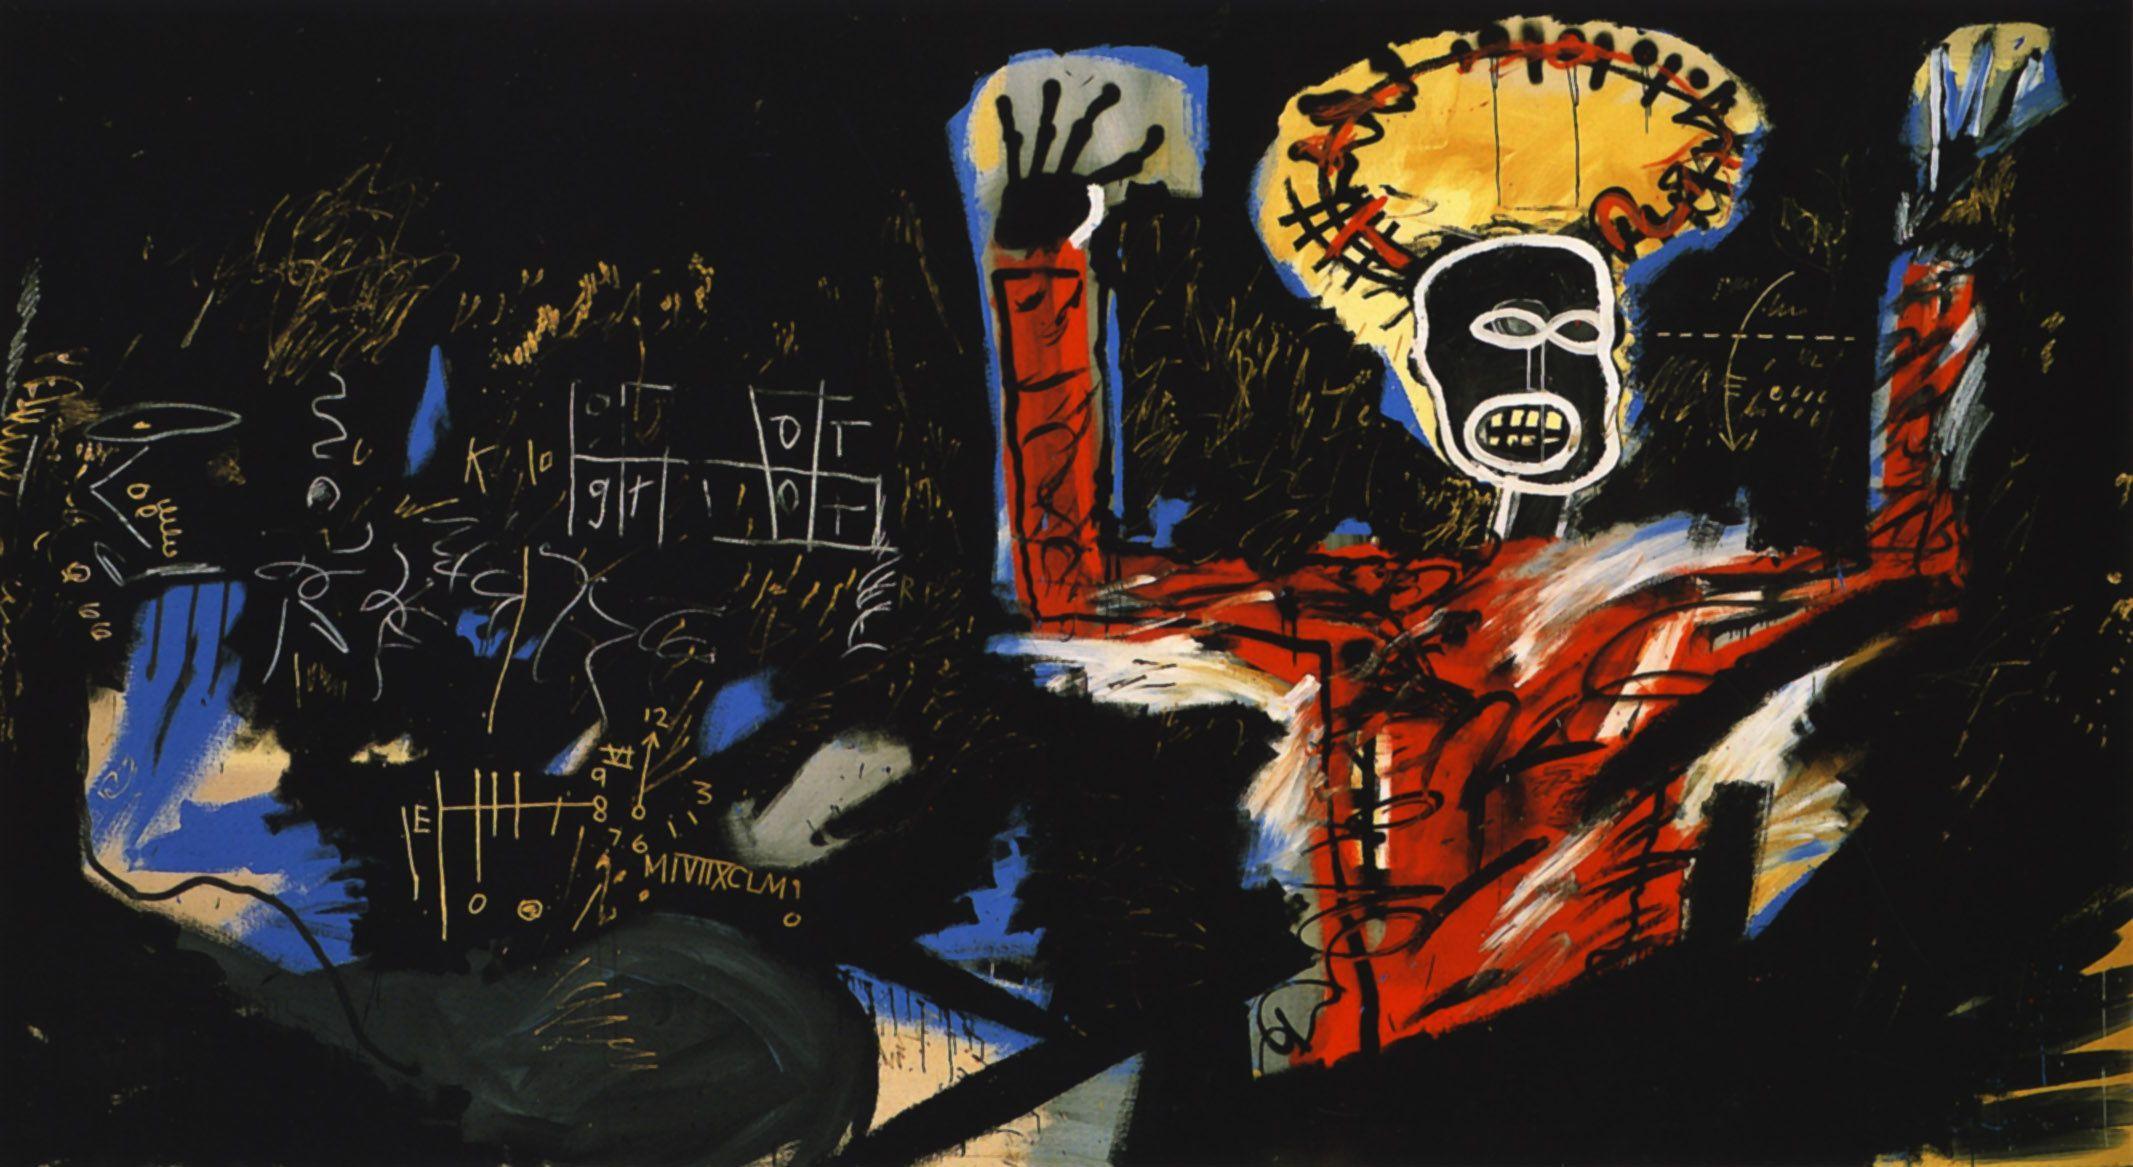 image about Home Is Where The Art Is Michel Basquiat